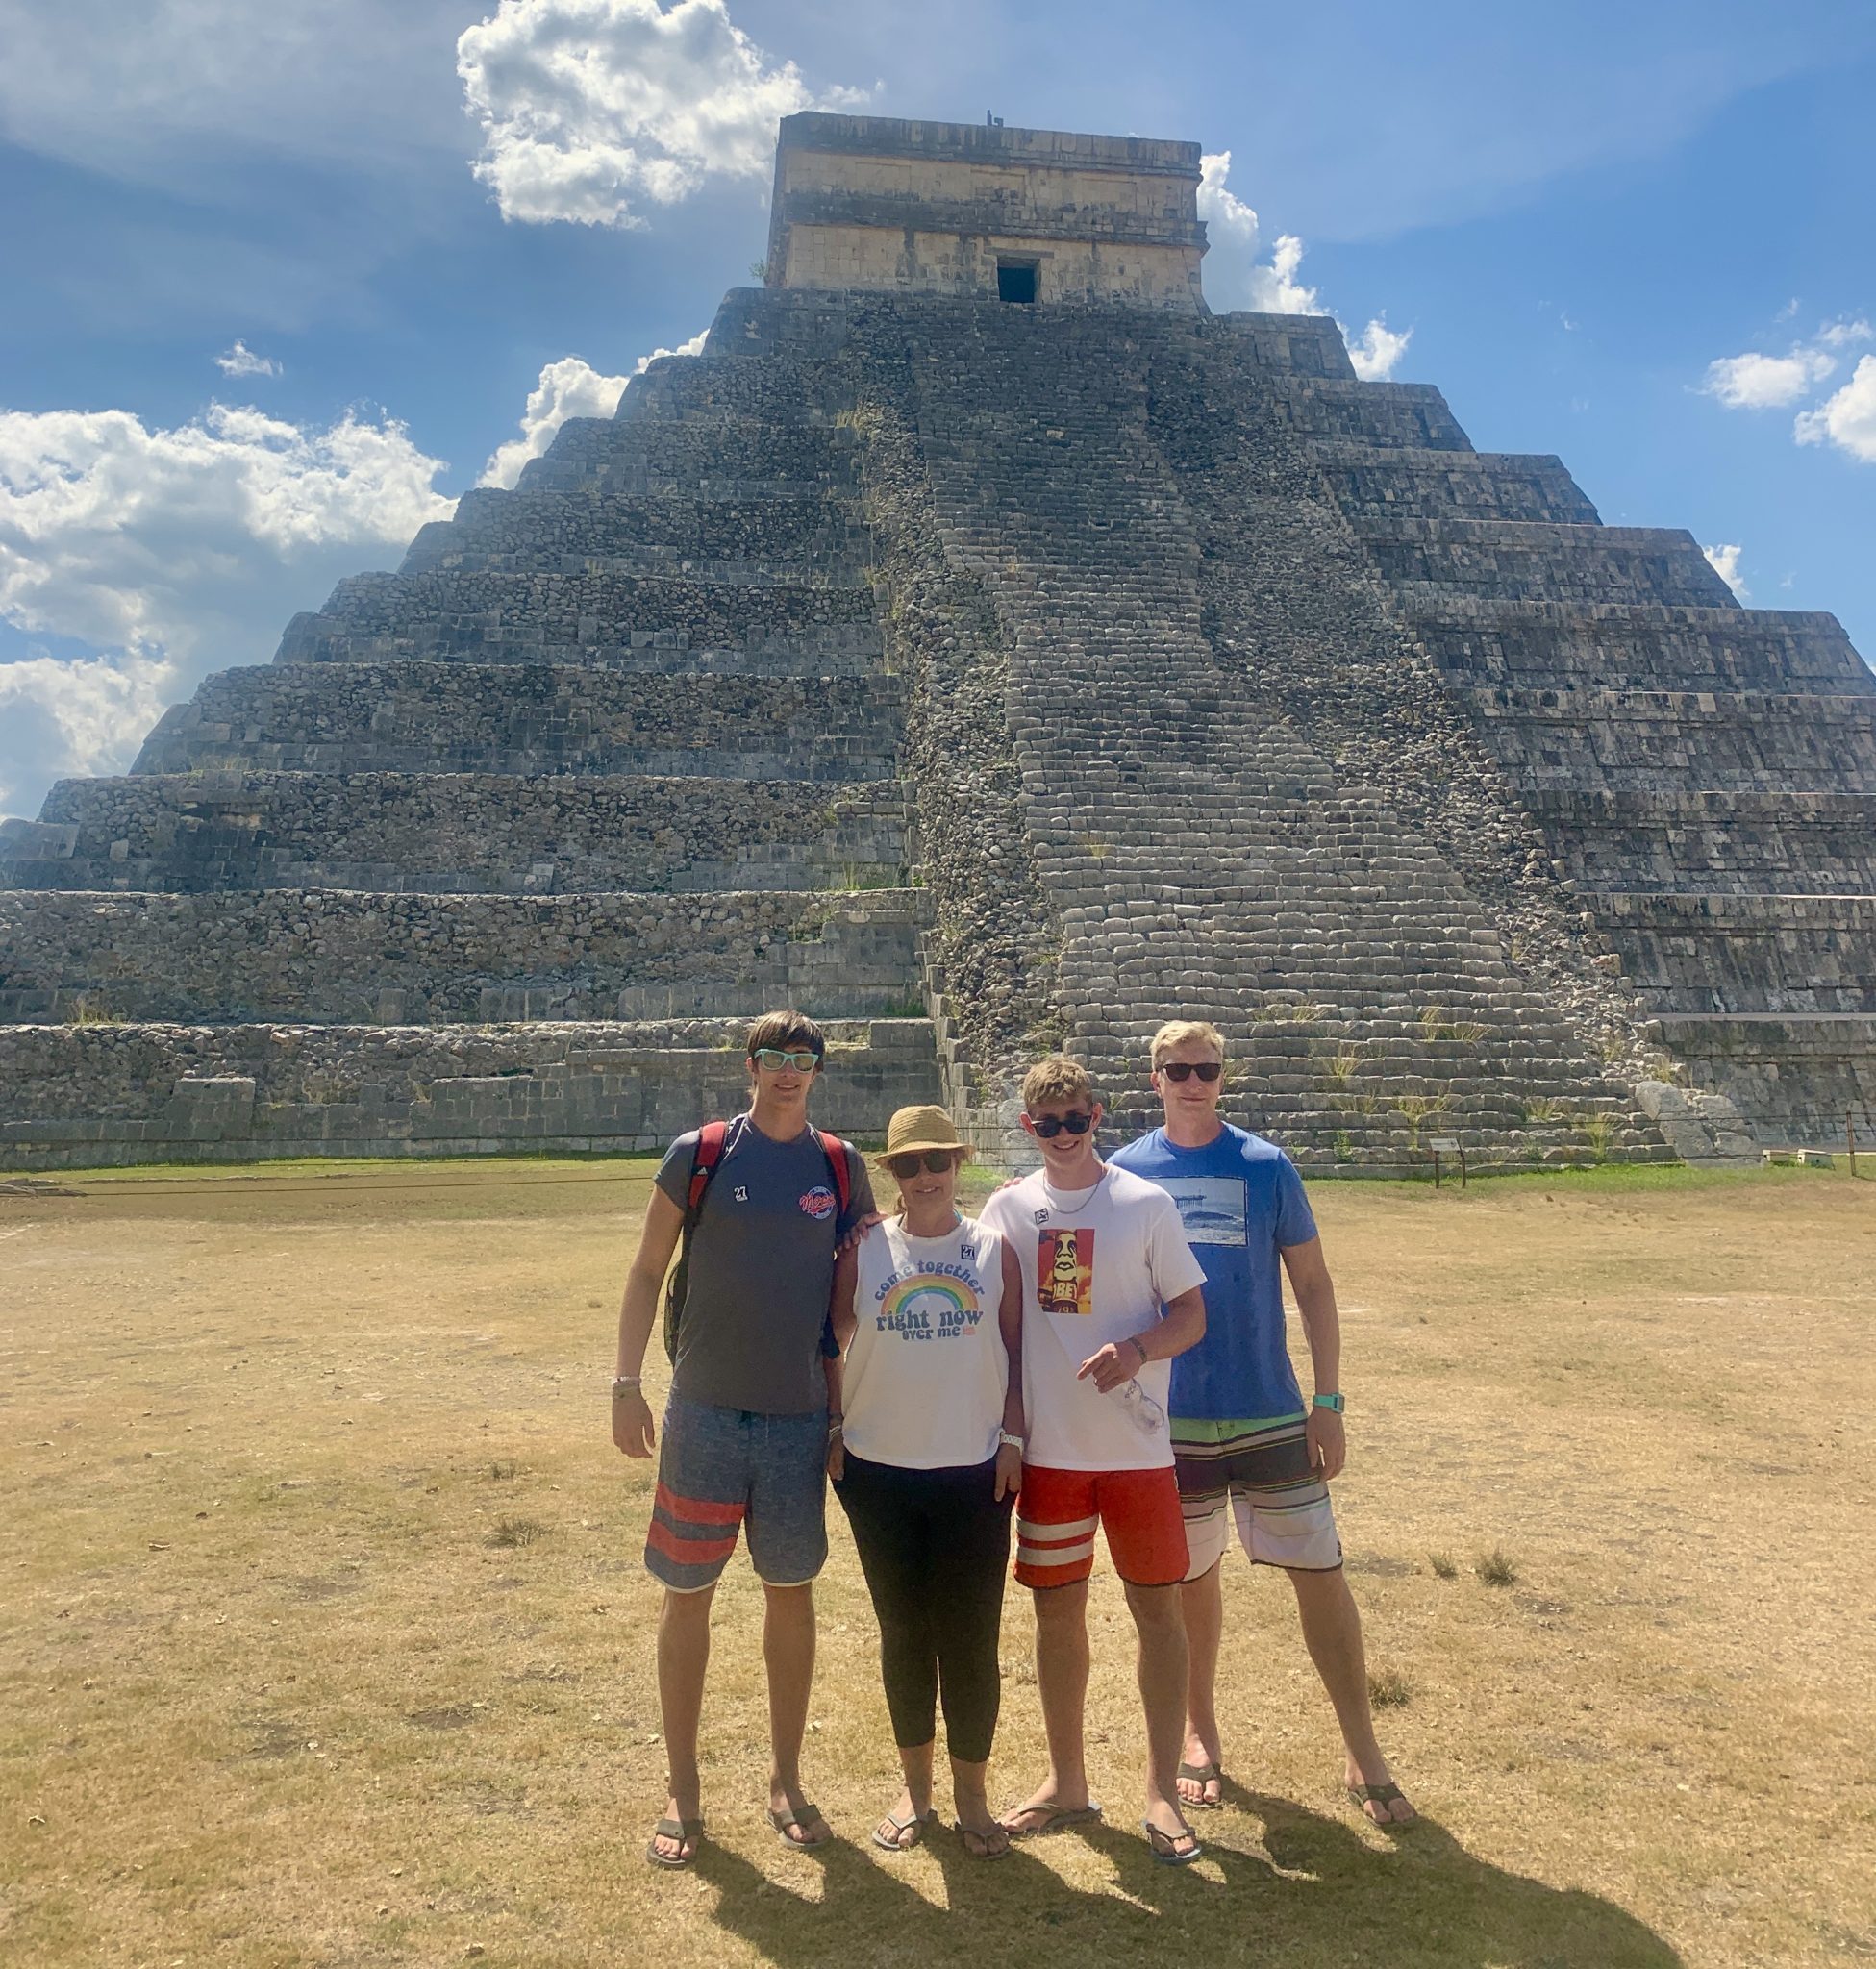 Chichen Itza Pyramid is one of the most impressive and well-preserved Mayan ruins in Mexico, and is recognized as one of the Seven Wonders of the World. 